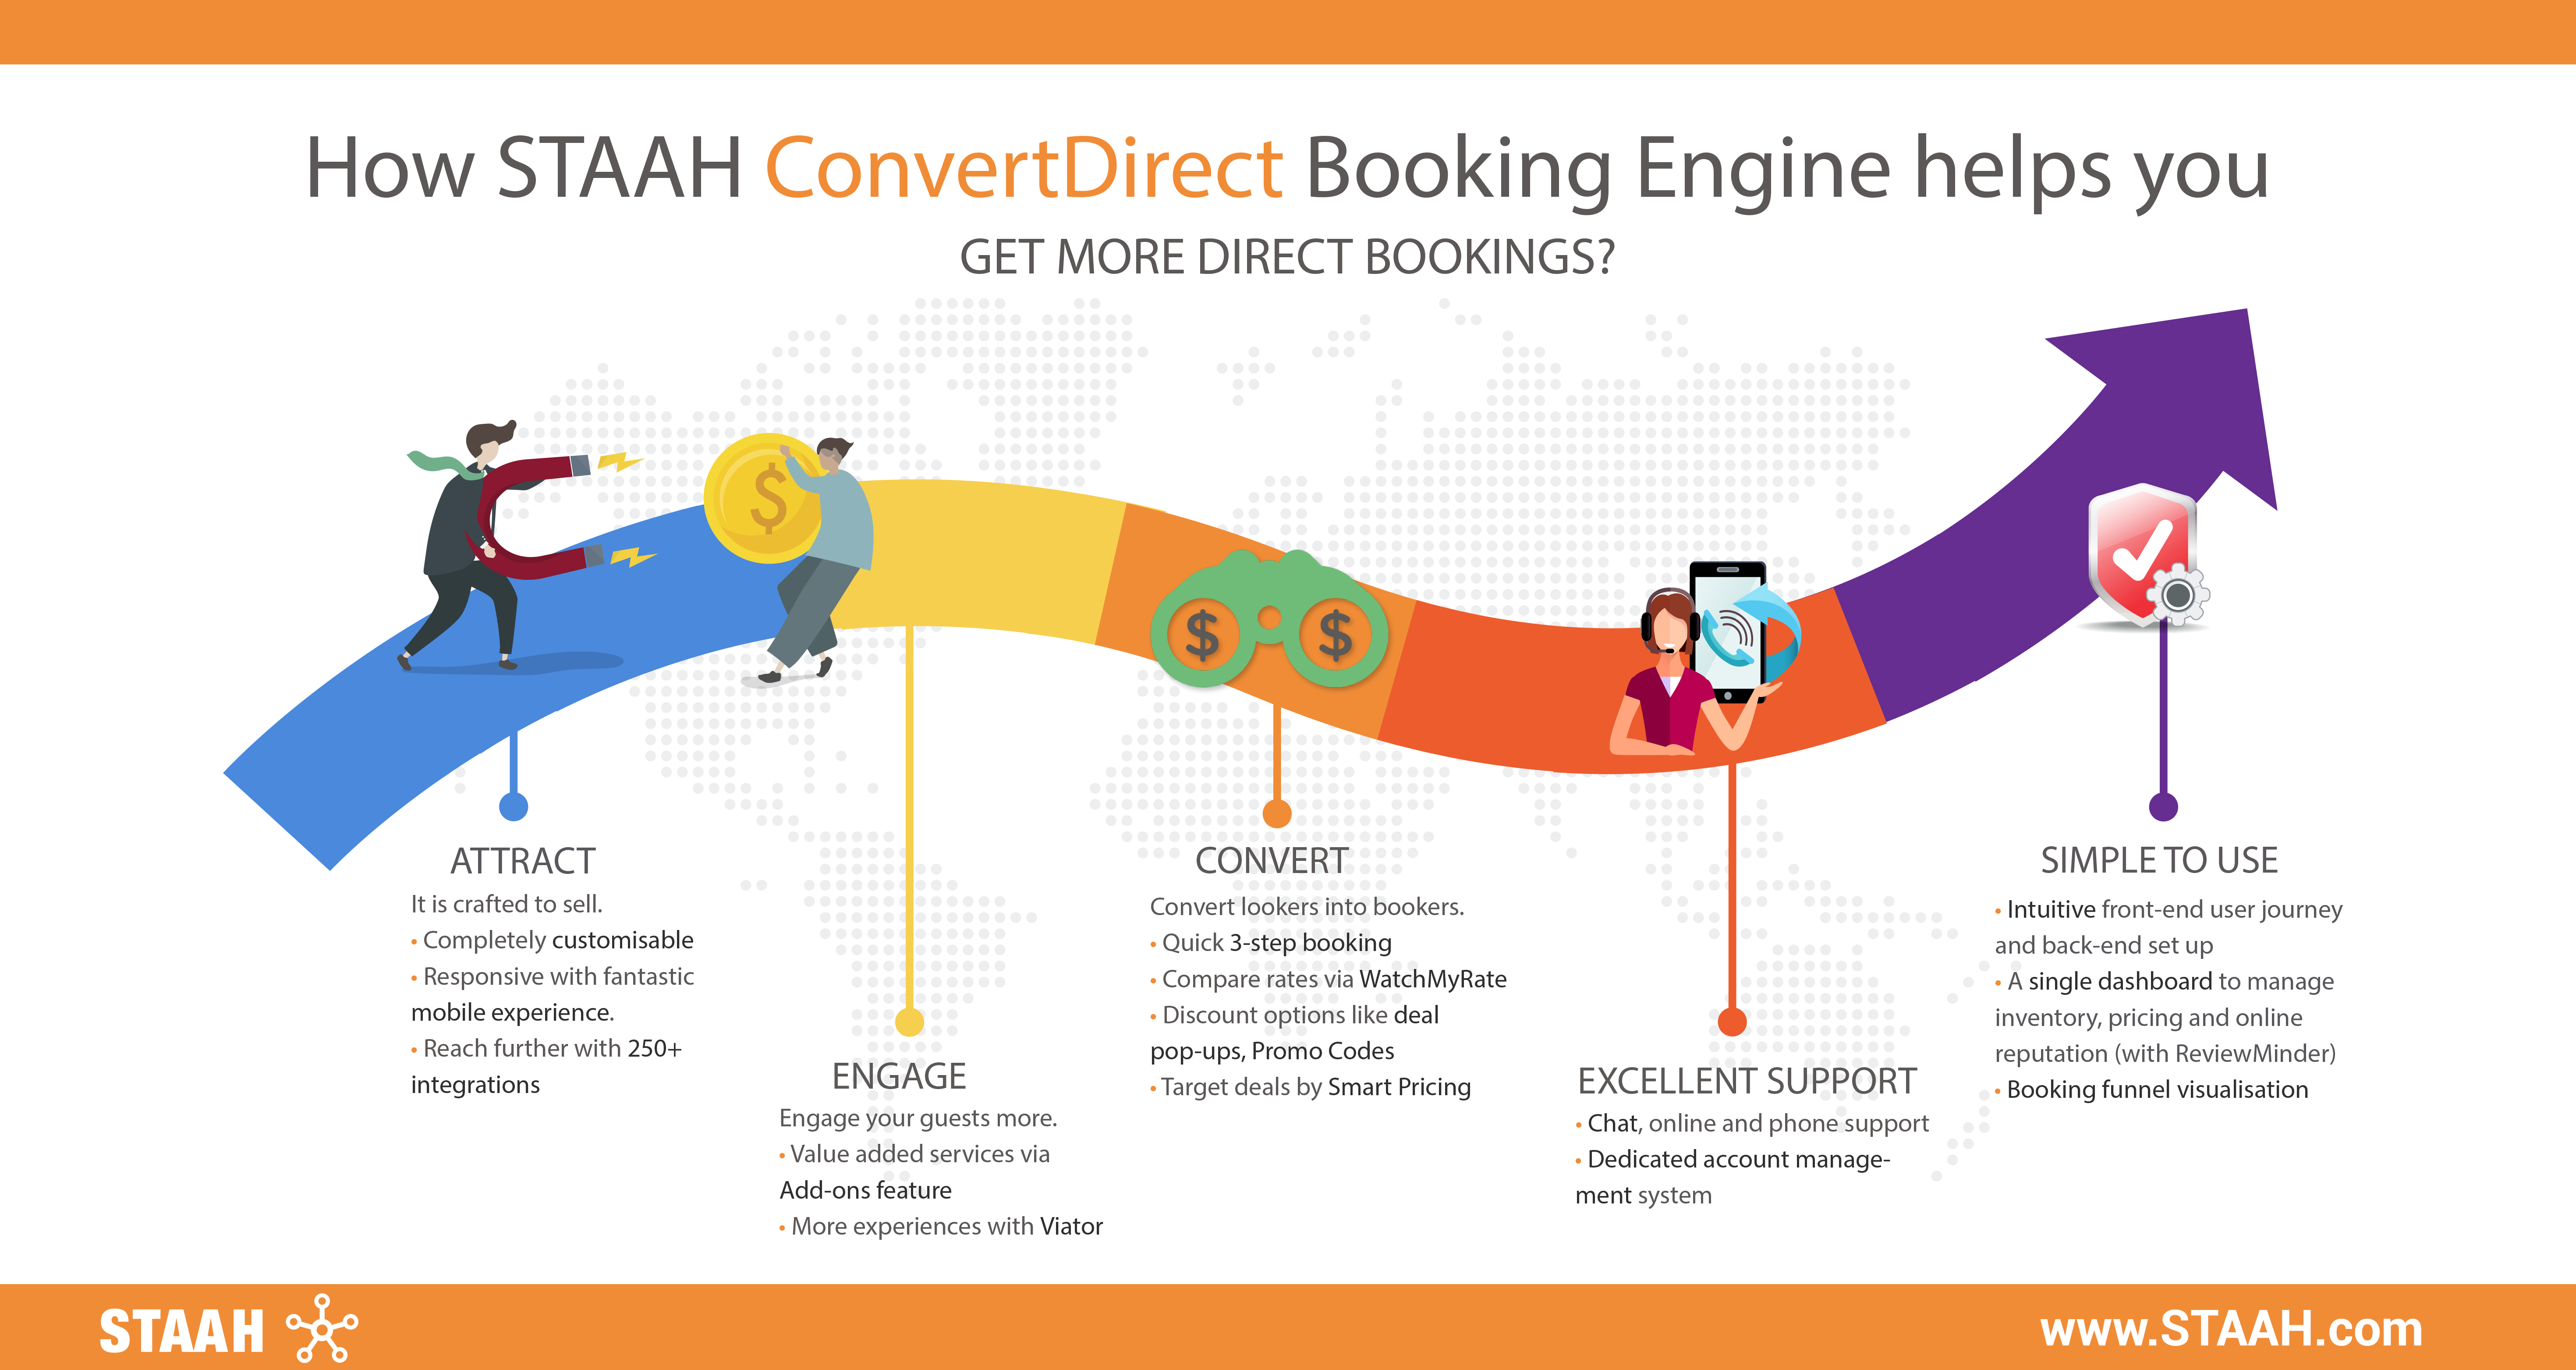 Benefits of STAAH ConvertDirect Booking Engine